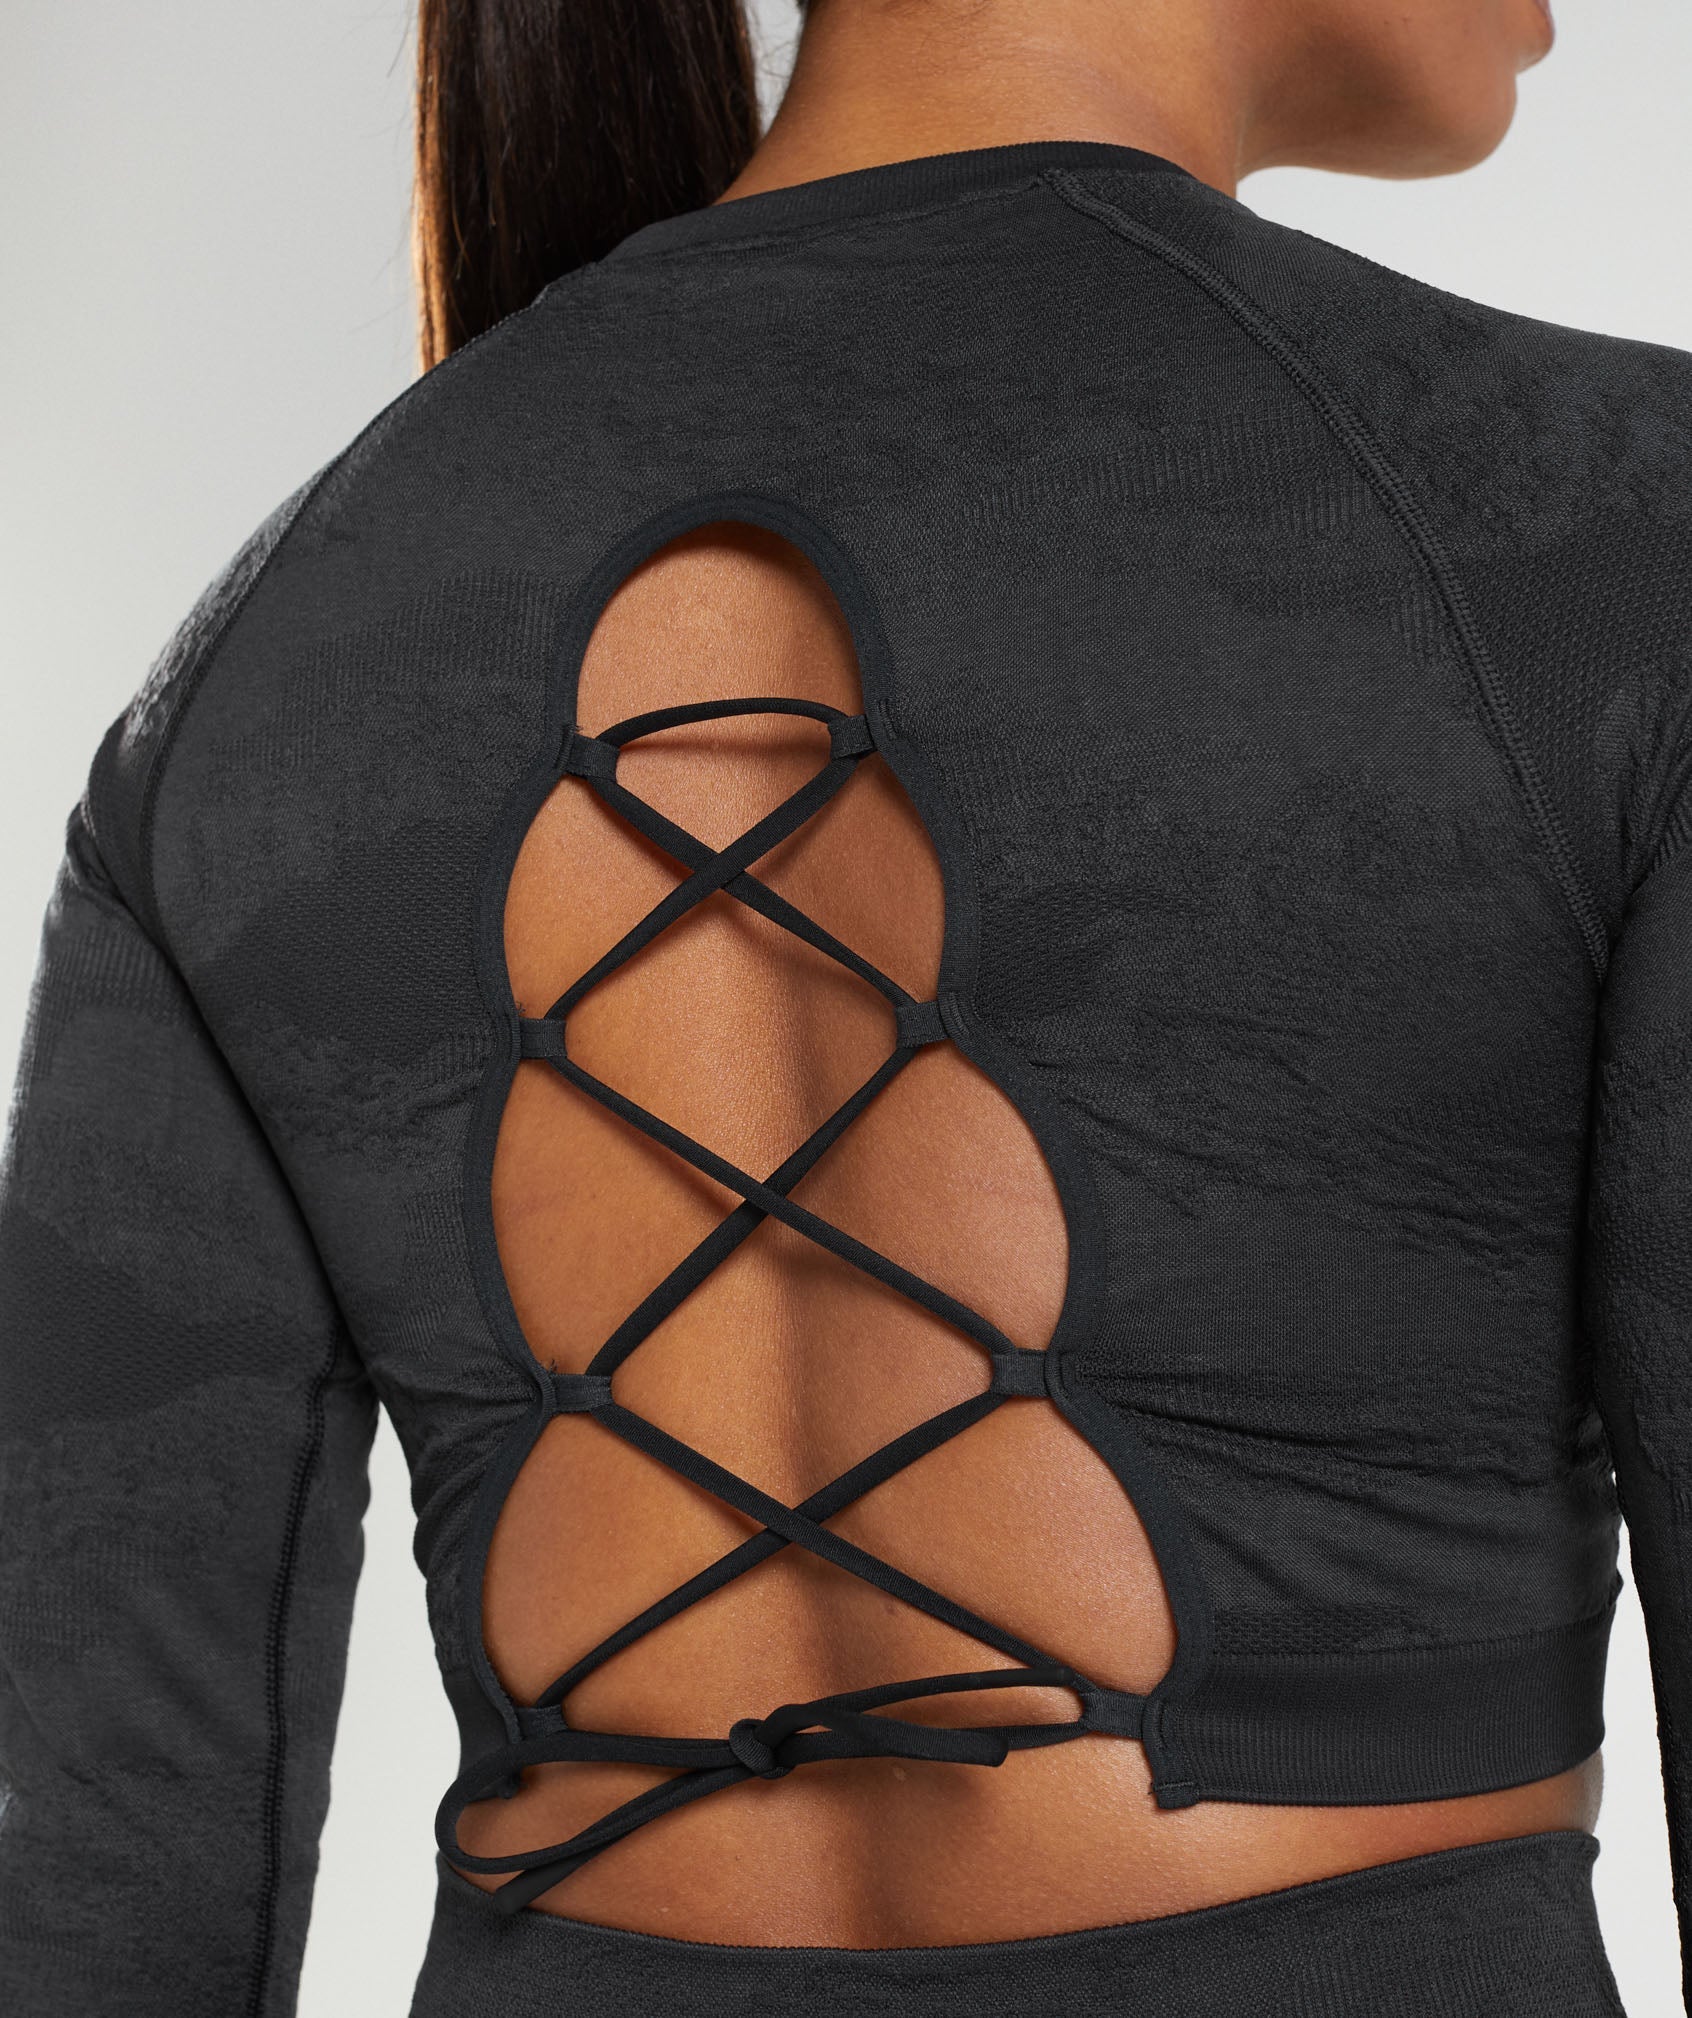 Adapt Camo Seamless Lace Up Back Top in Black/Onyx Grey - view 5